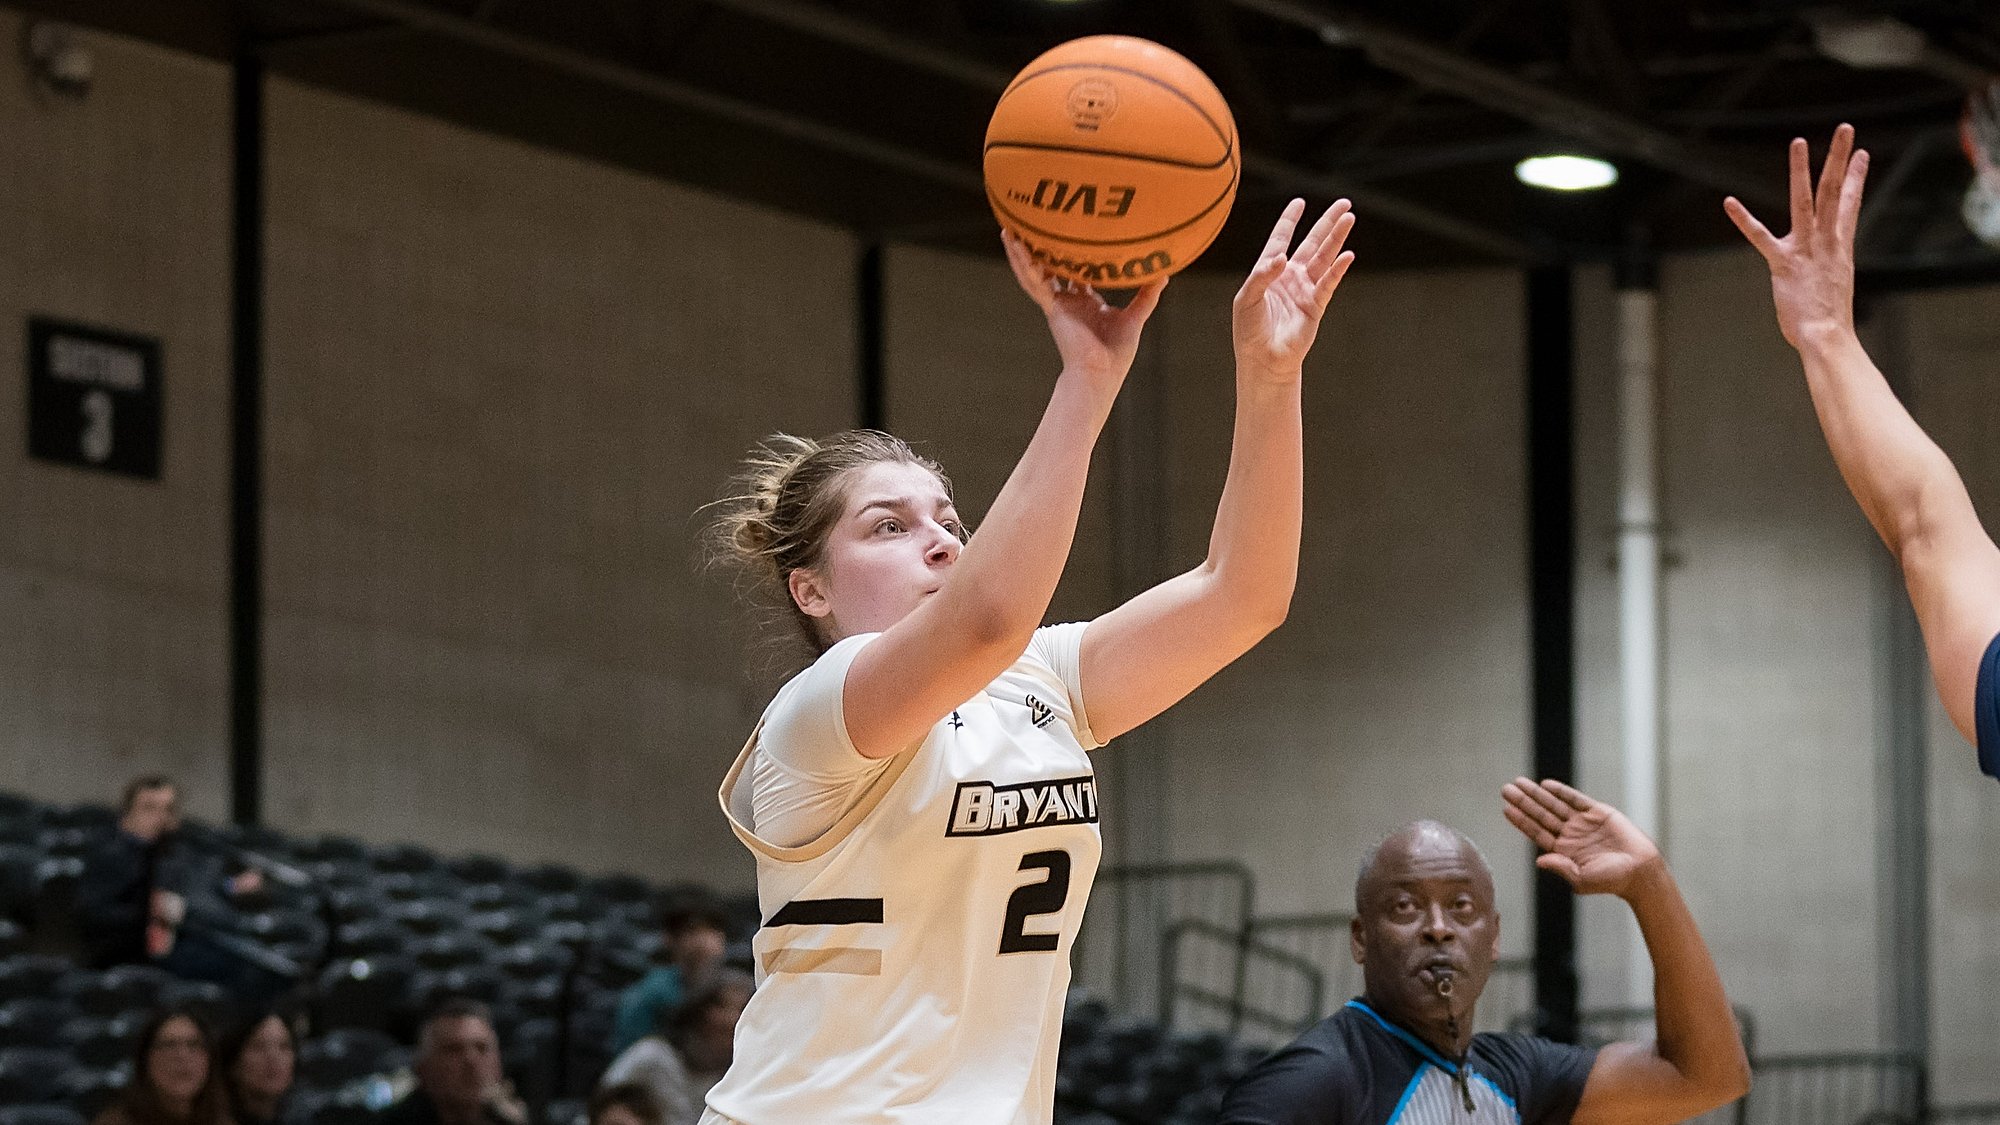 Fortuny posts 24 and Mancini's clutch 3 lifts Bryant over UNH